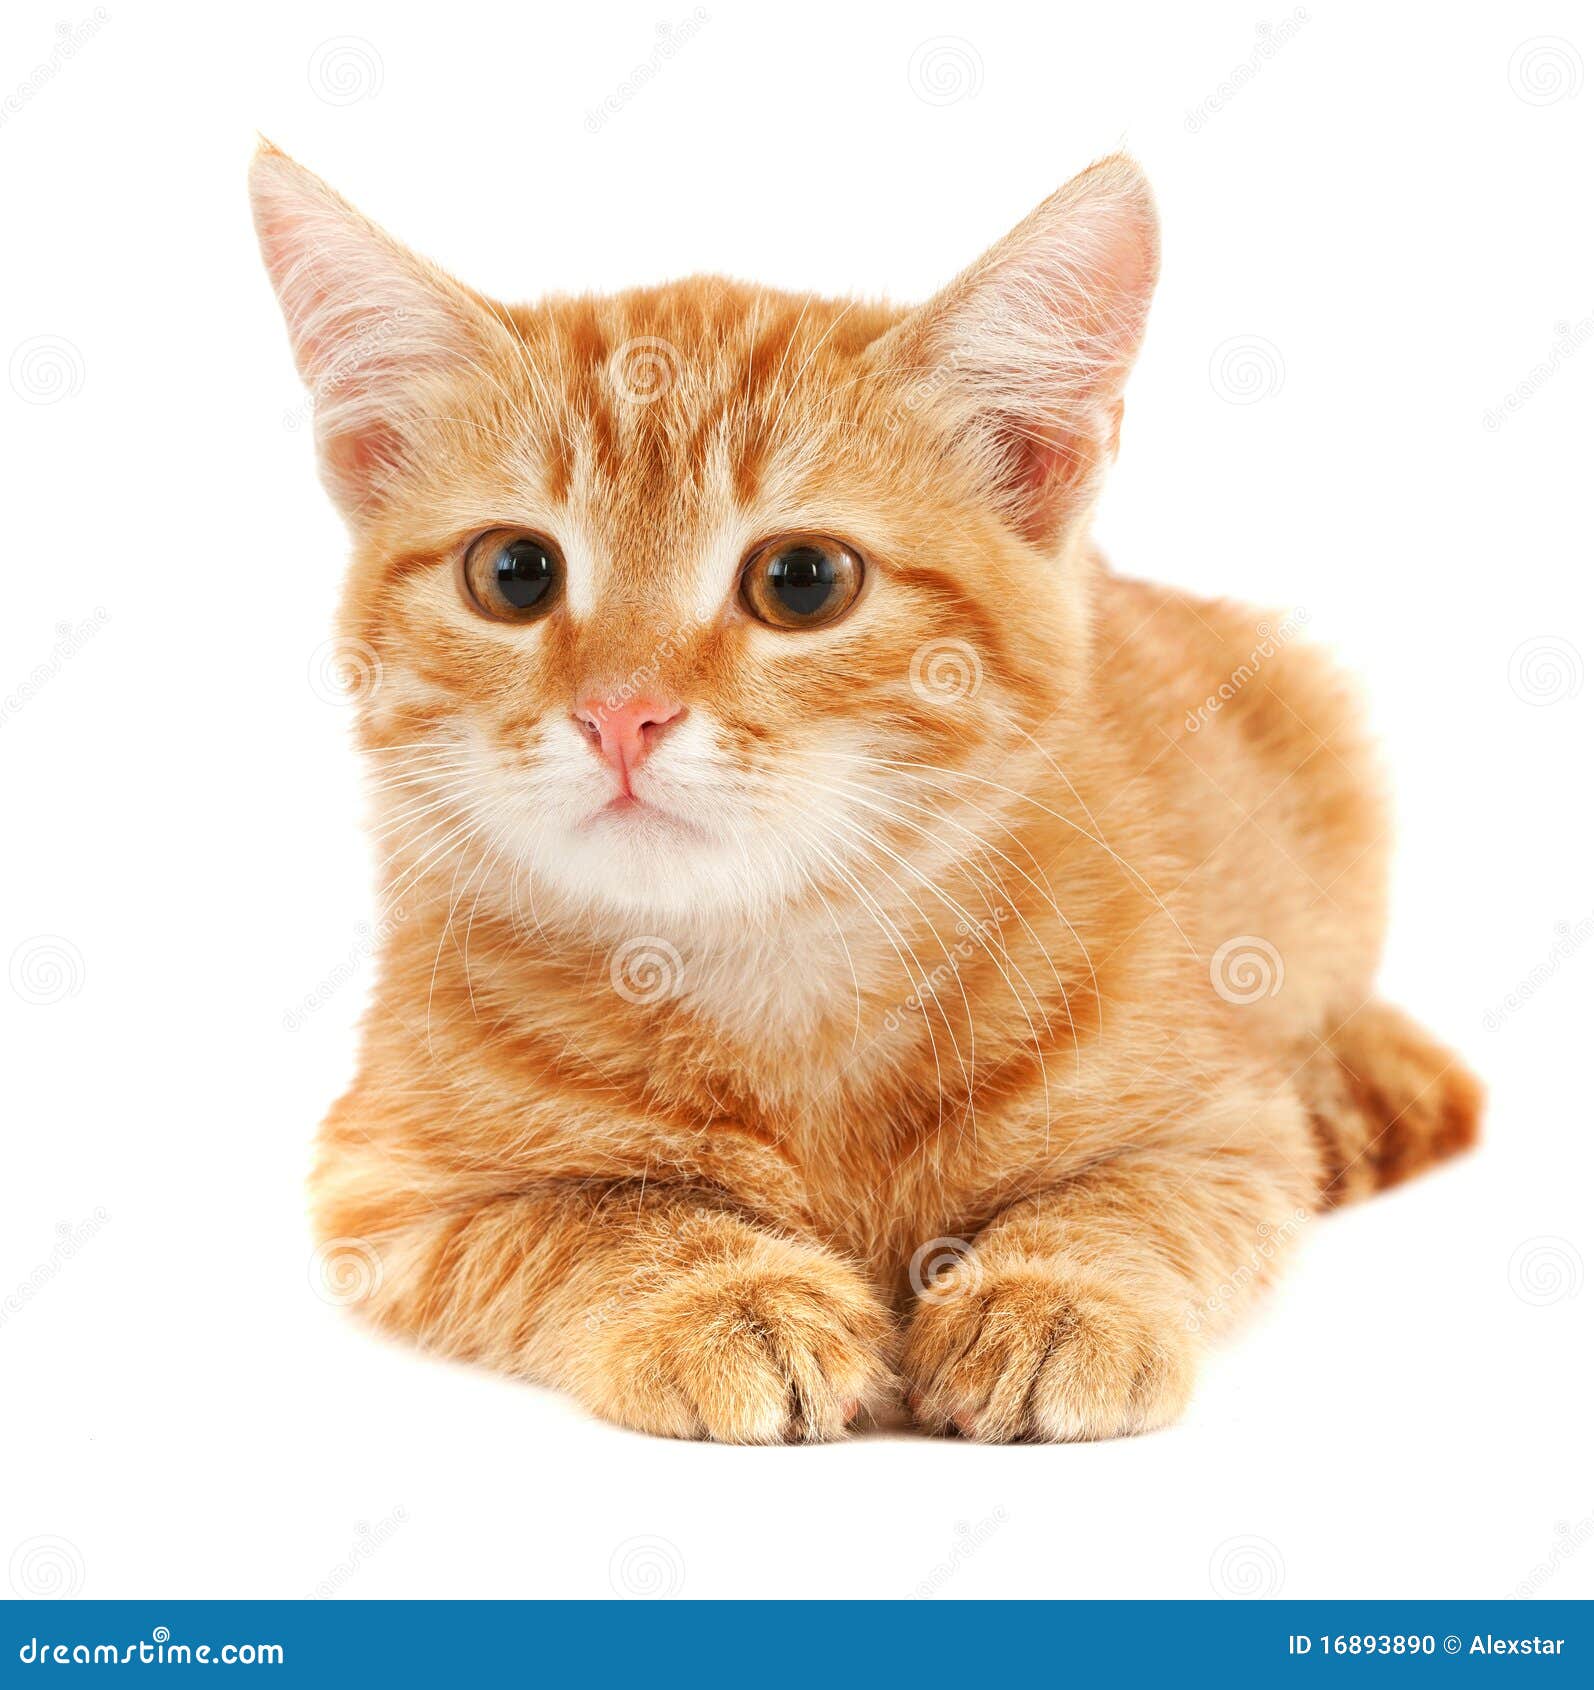 Cute Red Cat Stock Photo - Image: 16893890